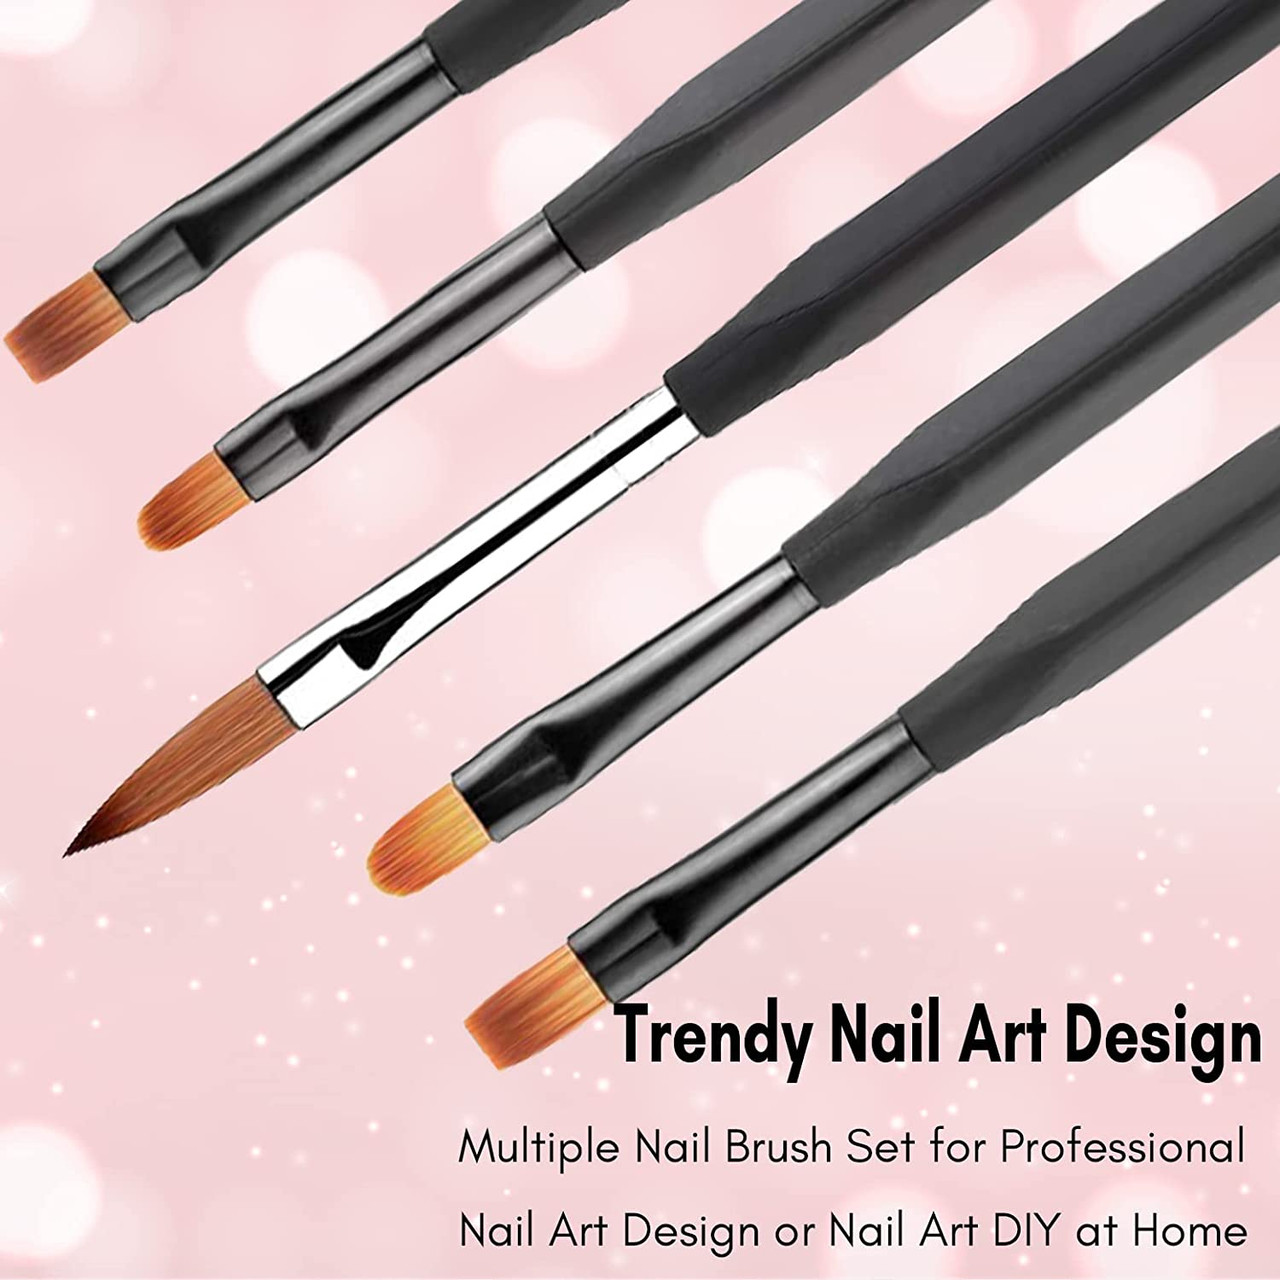 Top differences between makeup brushes and nail brushes - Queen Brush